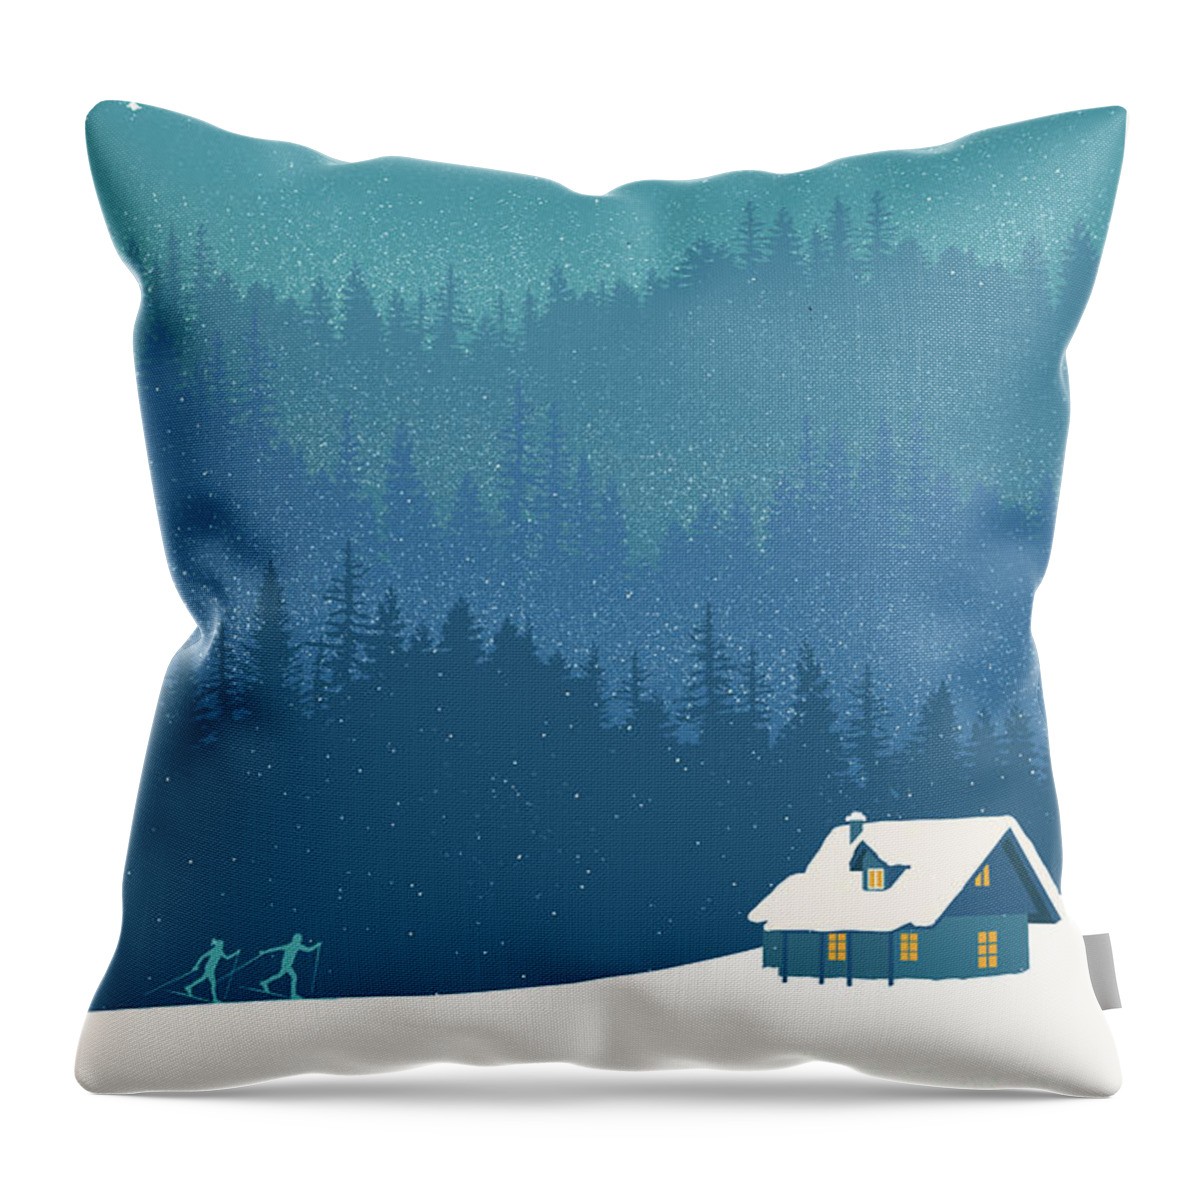 Nordic Ski Throw Pillow featuring the painting Nordic Cross Country Winter Ski Scene by Sassan Filsoof